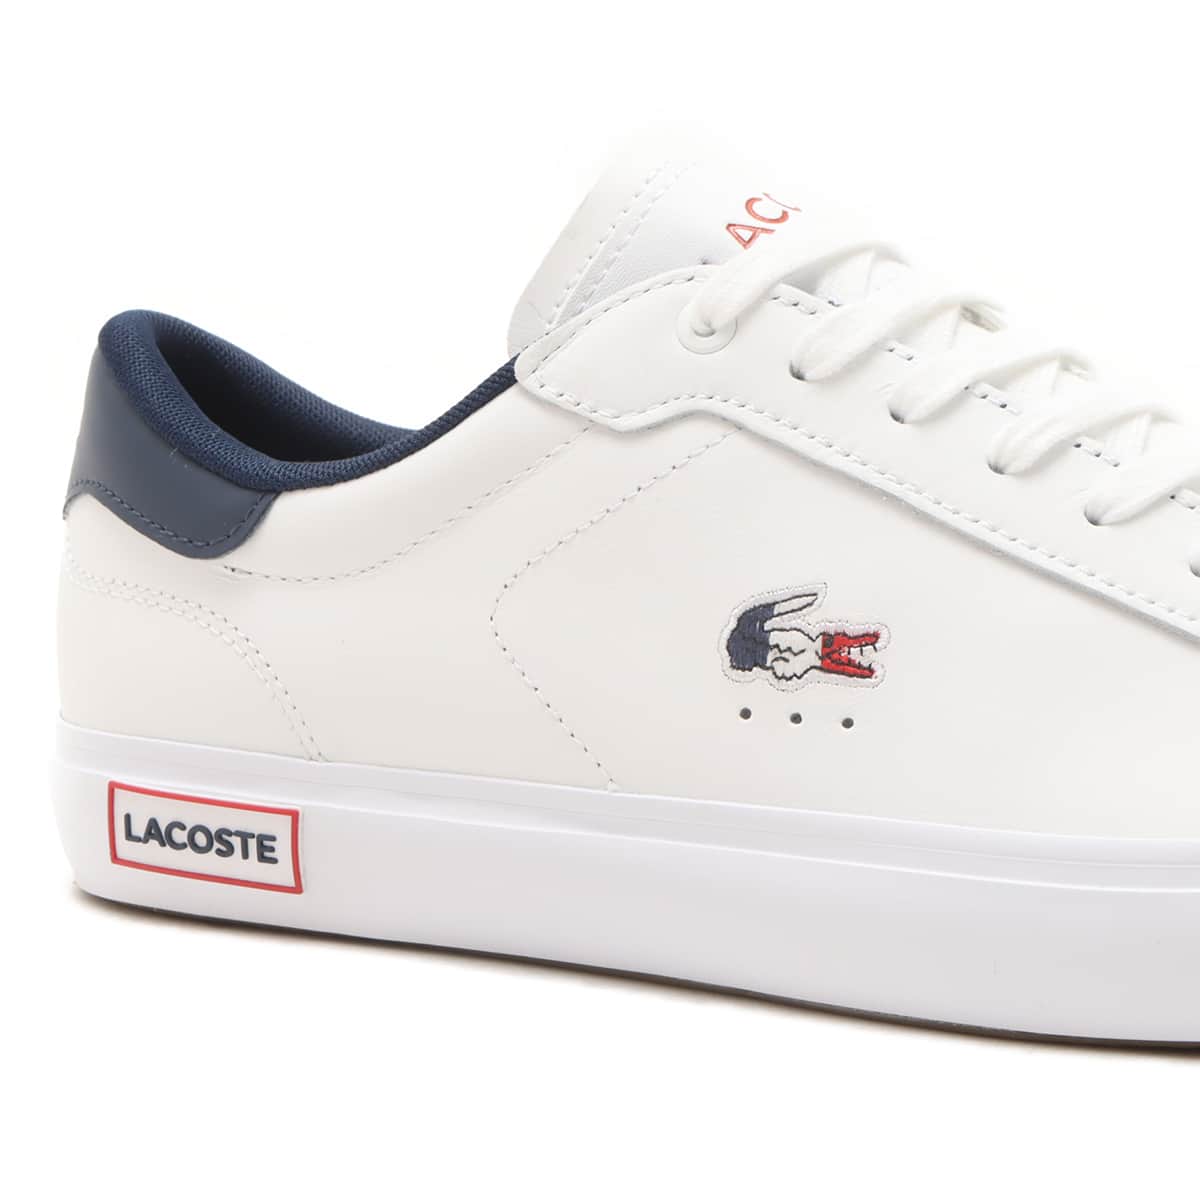 LACOSTE POWERCOURT TRI22 1 SMA WHT/NVY/RED 24SP-I